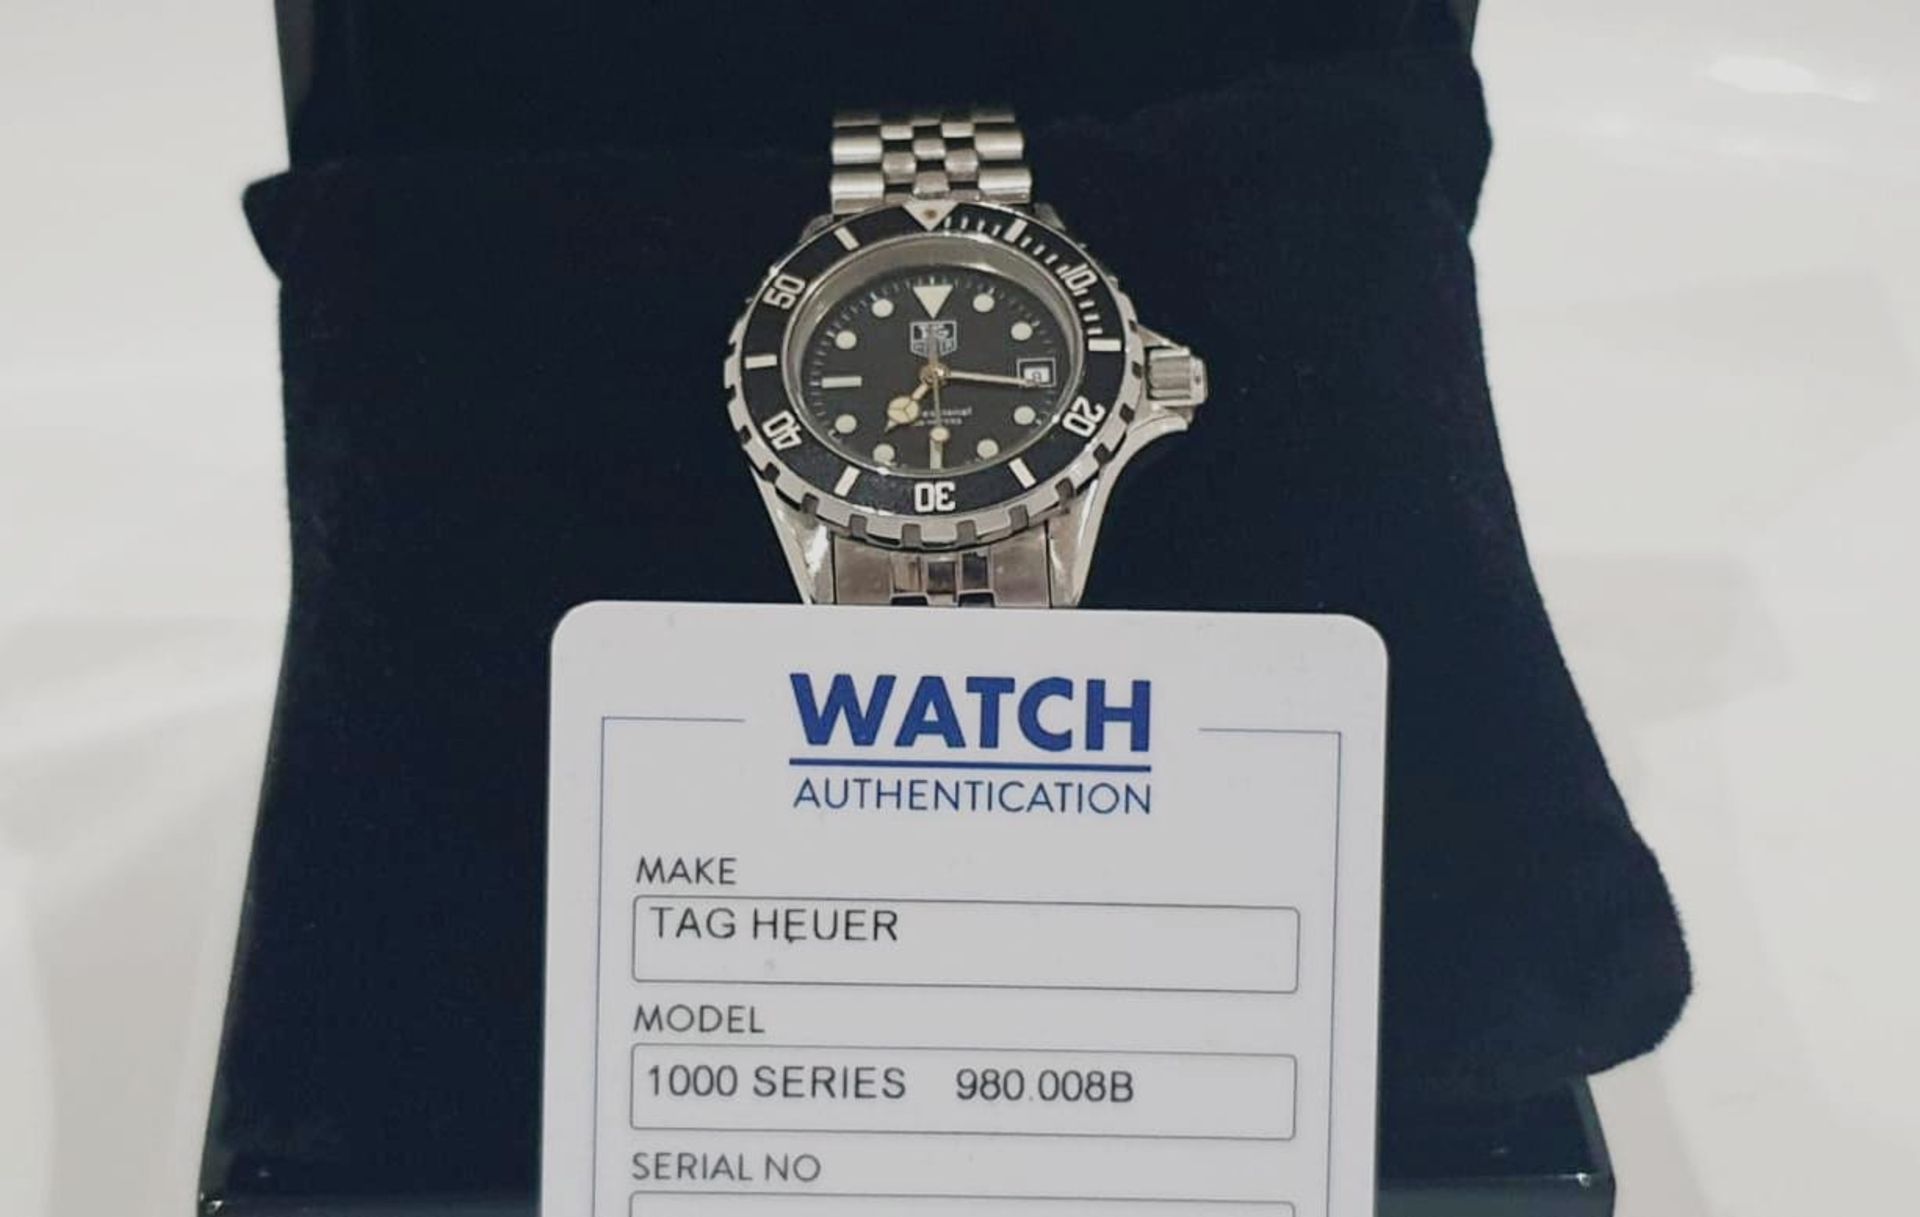 TAG HEUER PROFESSIONAL WOMENS WATCH 28MM, Black & Steel, GUARANTEE CARD, STUNNING WATCH - Image 3 of 11